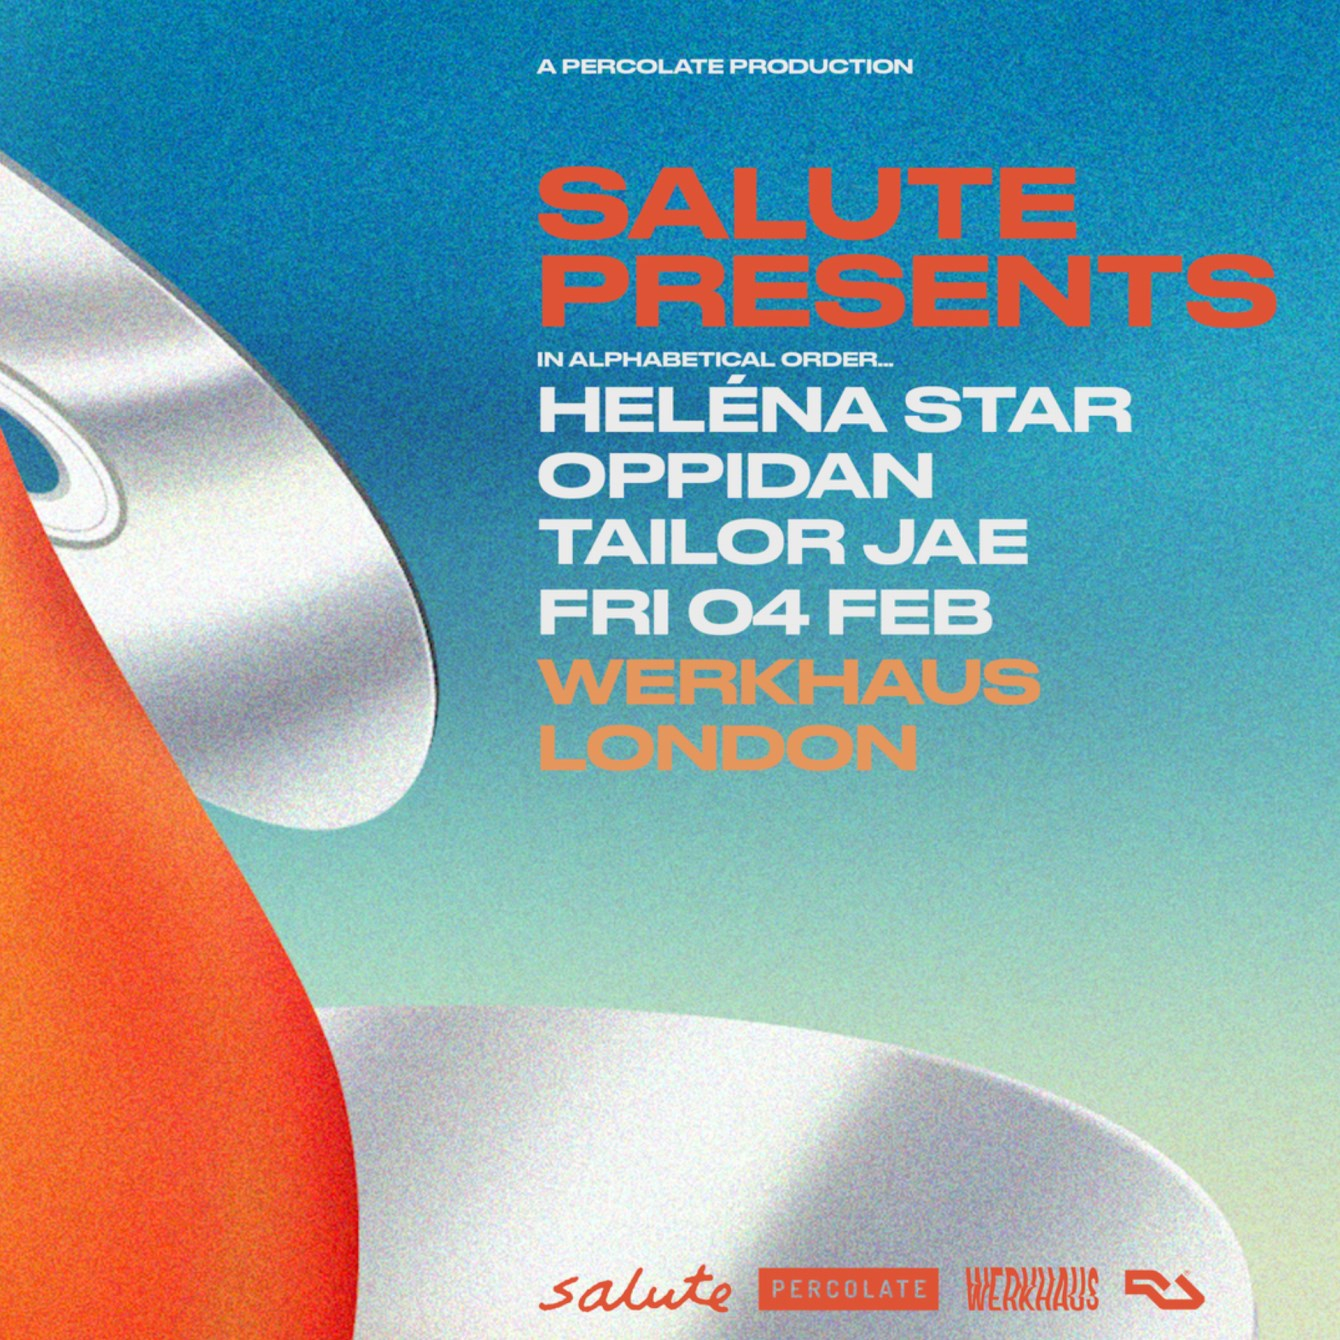 salute presents - Flyer front